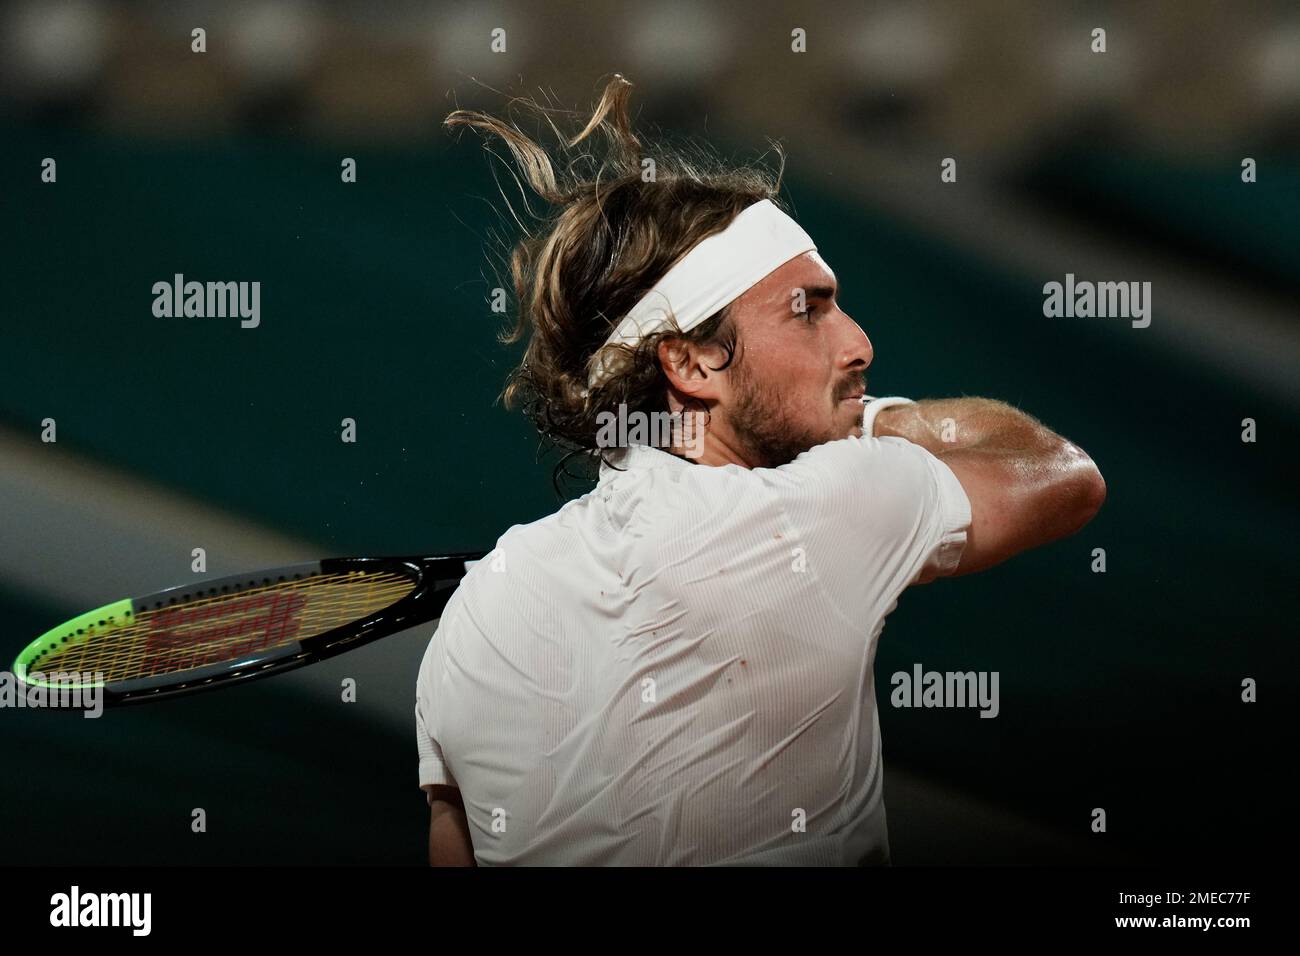 Stefanos Tsitsipas of Greece slams a forehand to Russias Daniil Medvedev during their quarterfinal match of the French Open tennis tournament at the Roland Garros stadium Tuesday, June 8, 2021 in Paris